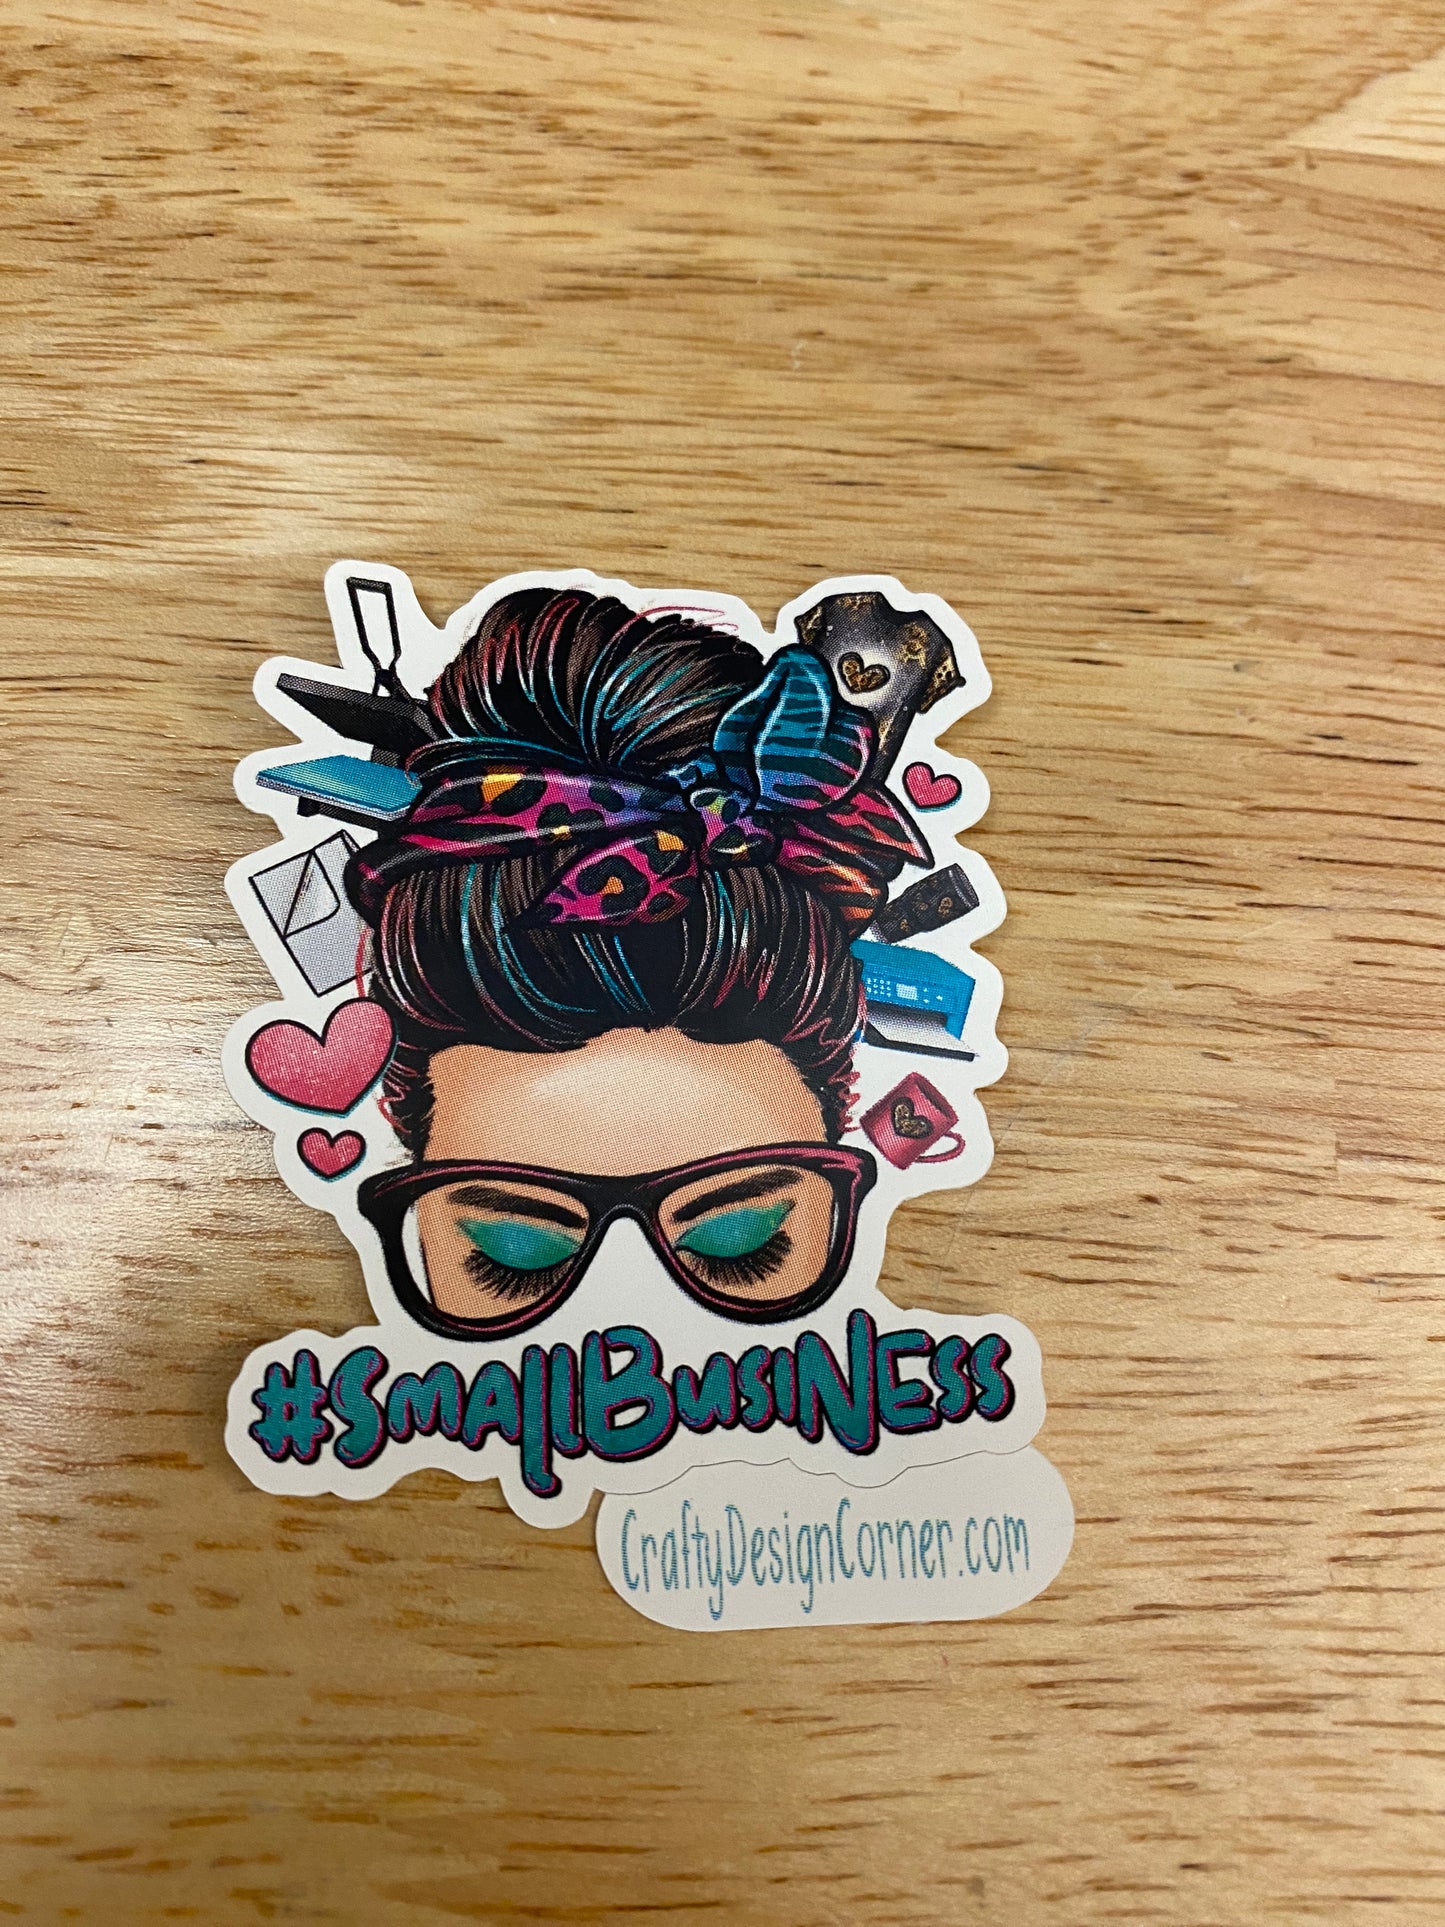 Small business lady with hair bun and glasses